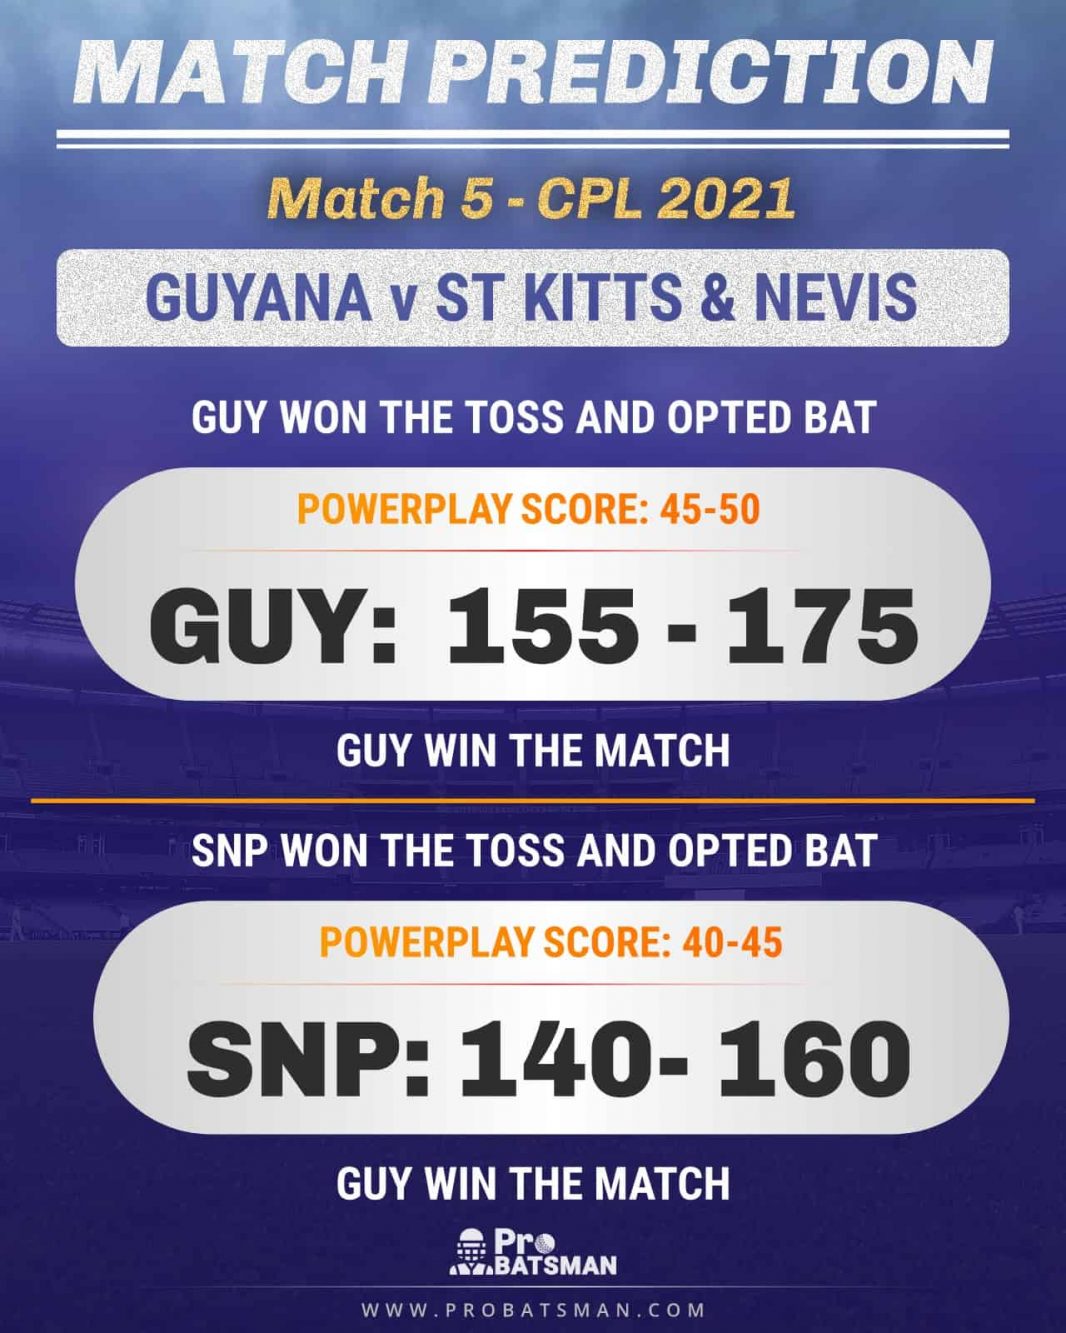 CPL 2021 Match 5: GUY vs SKN Match Prediction – Who Will Win Today’s Match?